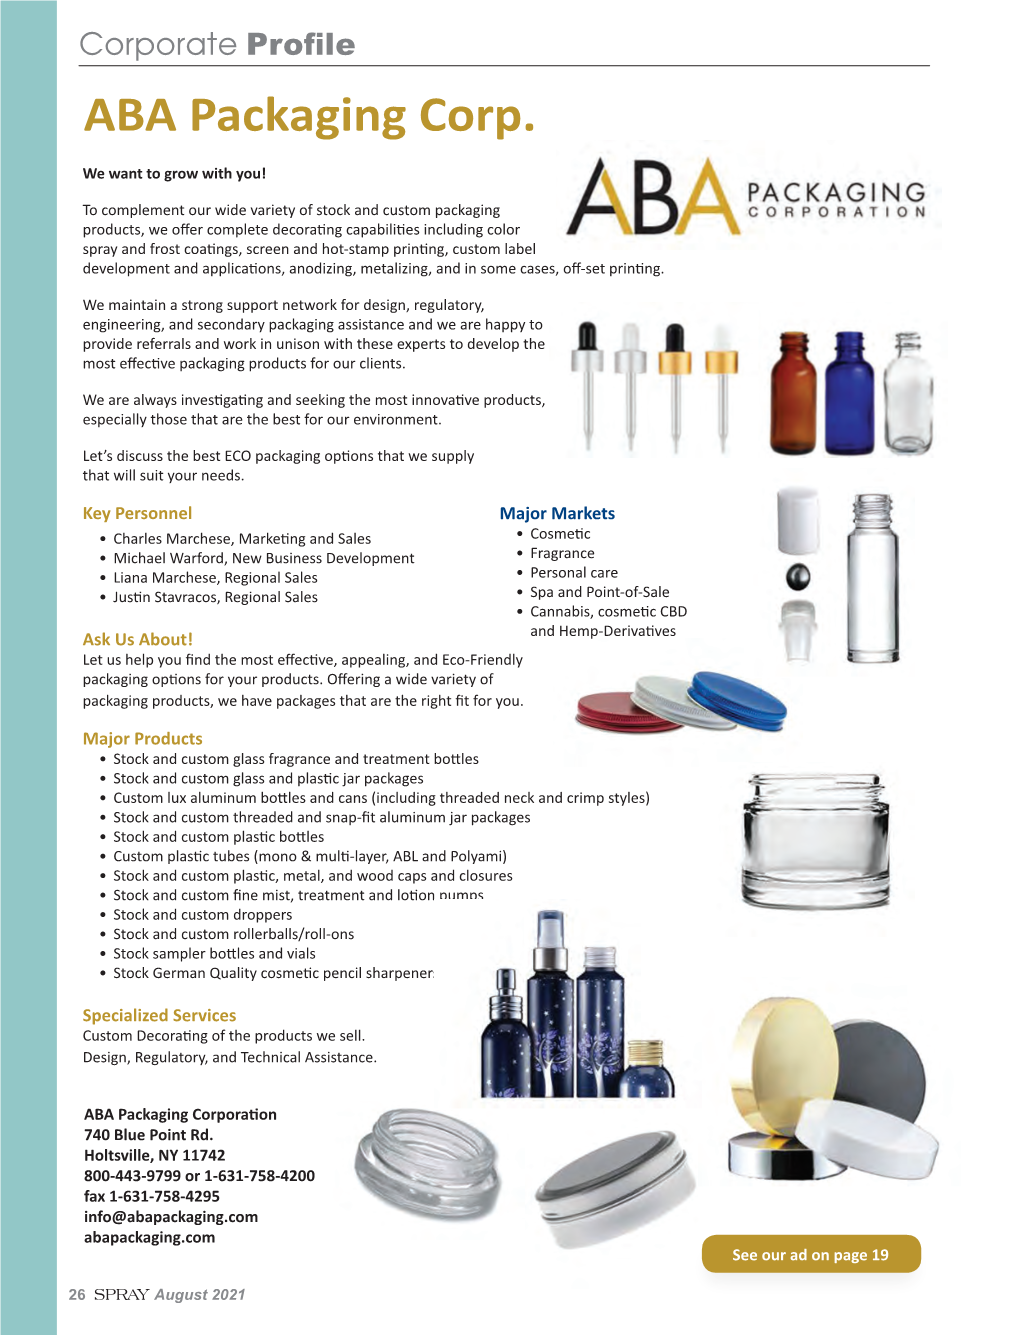 Corporate Profile ABA Packaging Corp